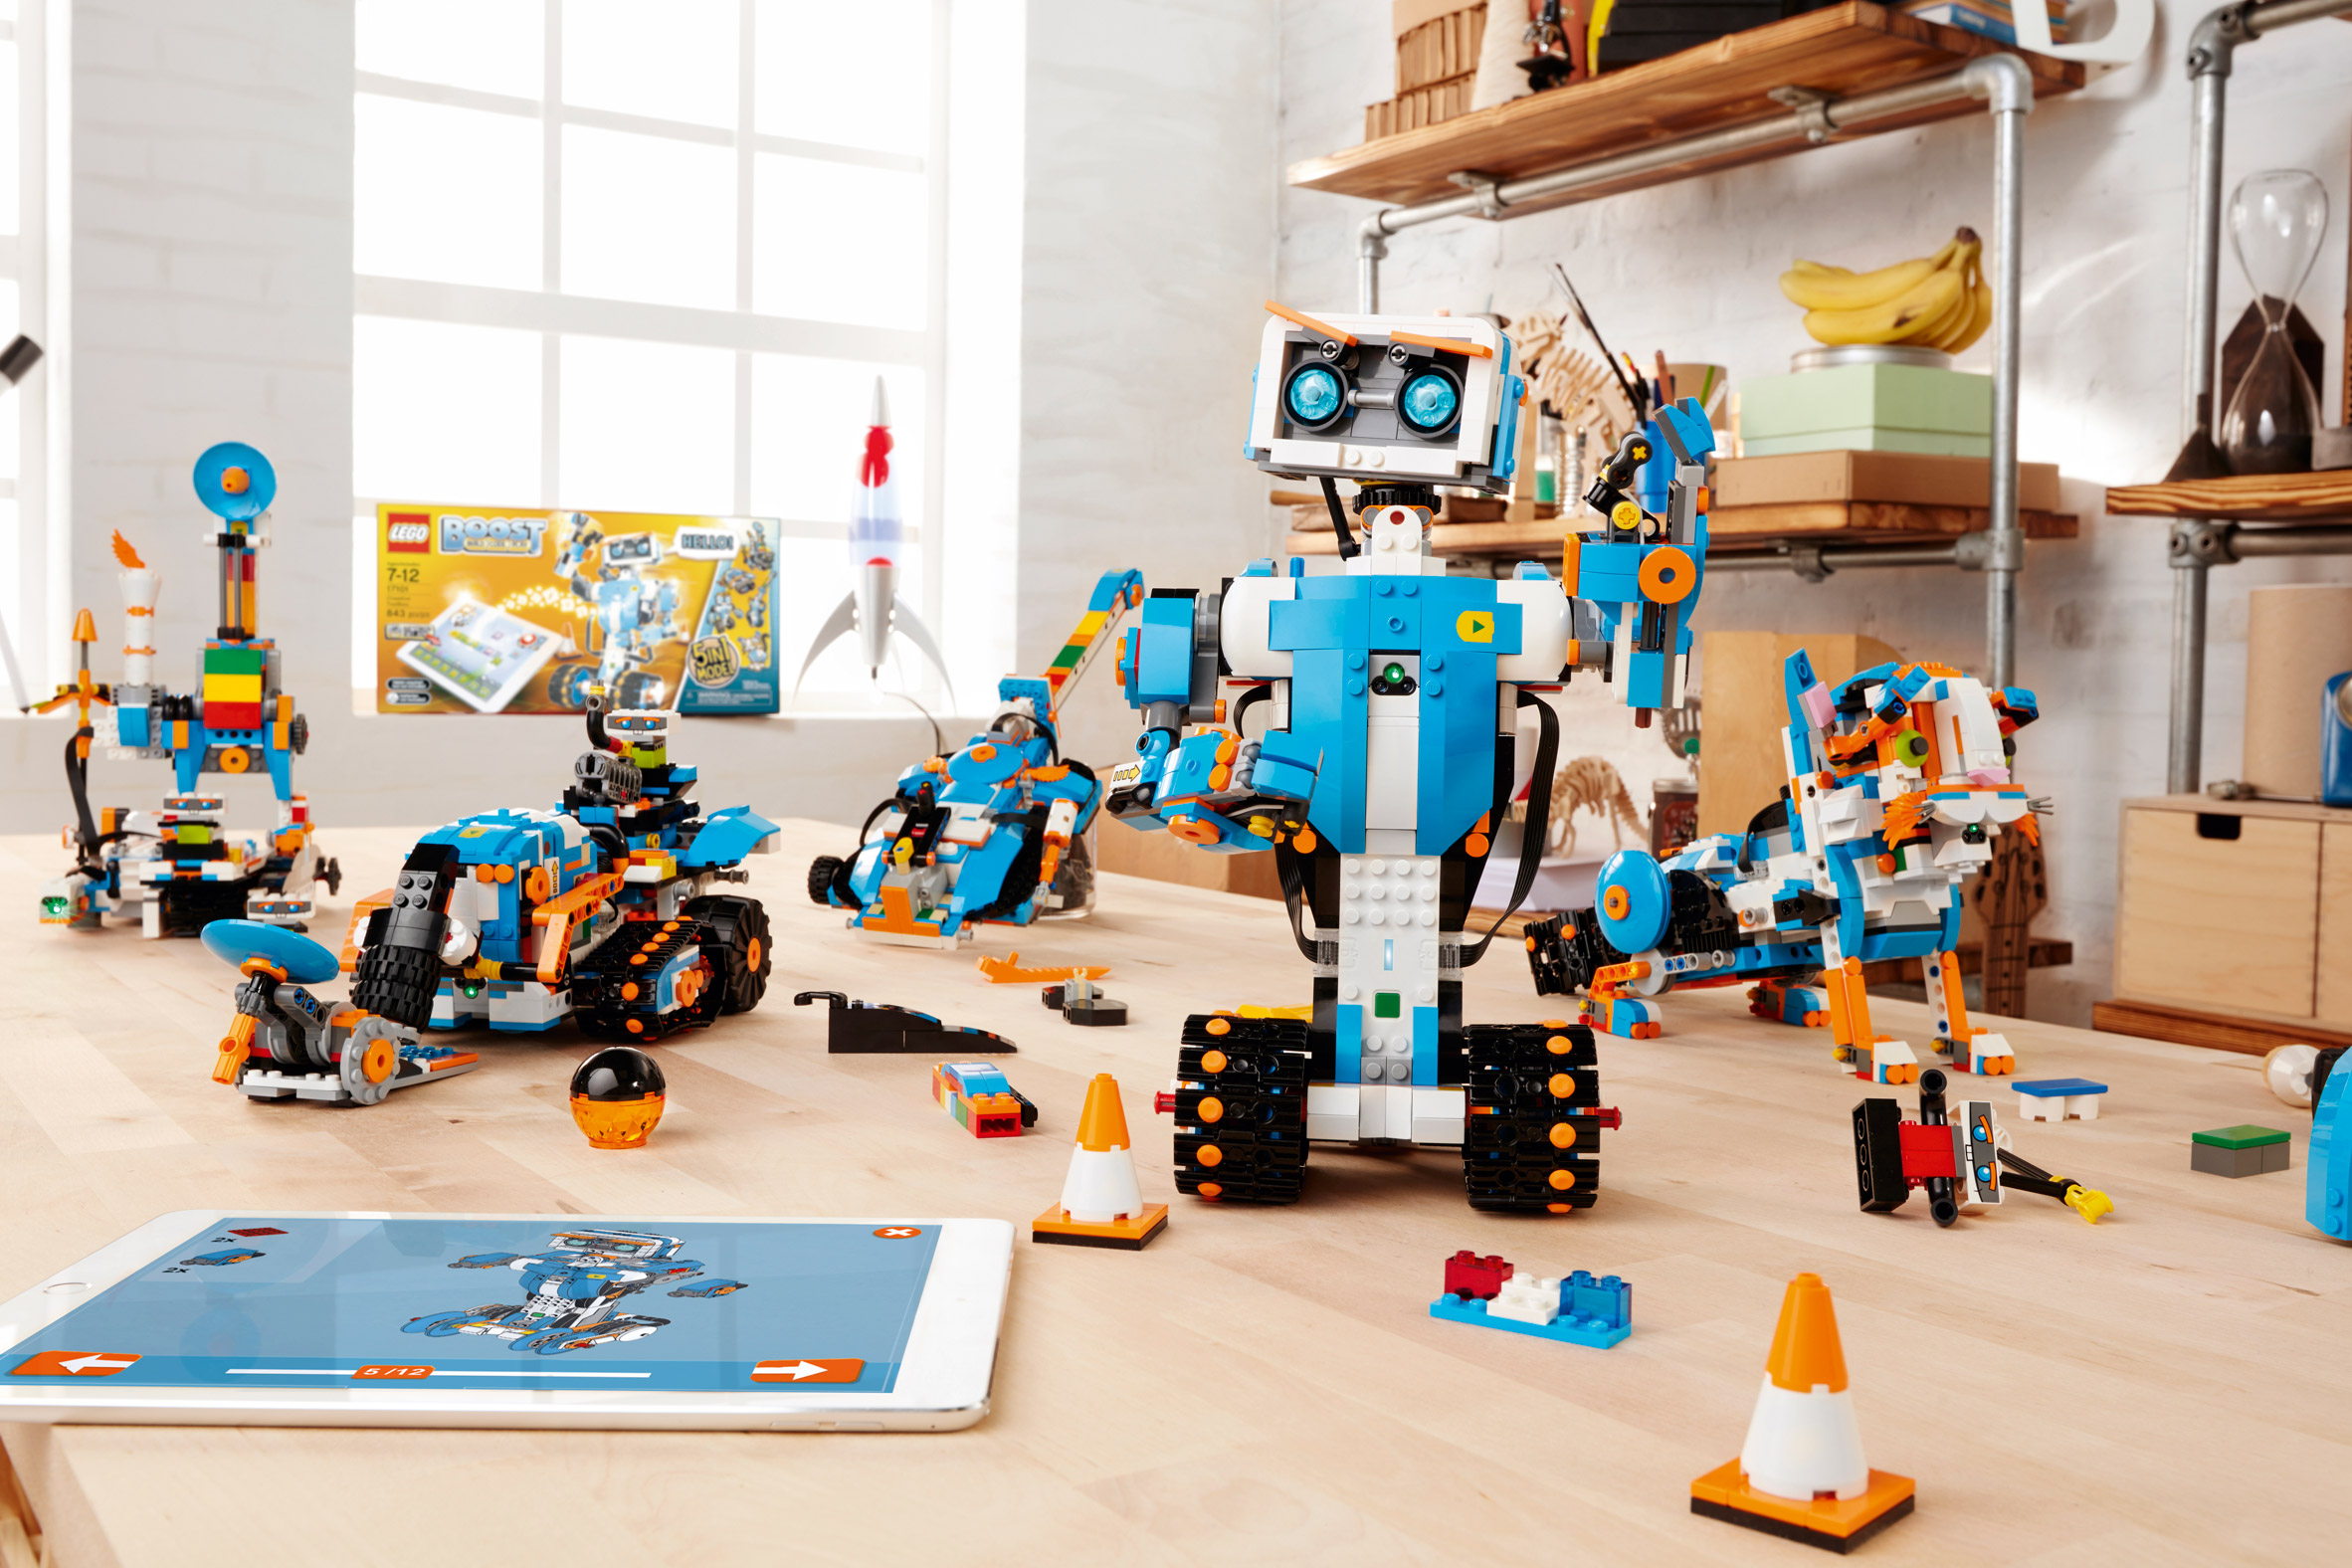 Lego Boost to help children learn coding